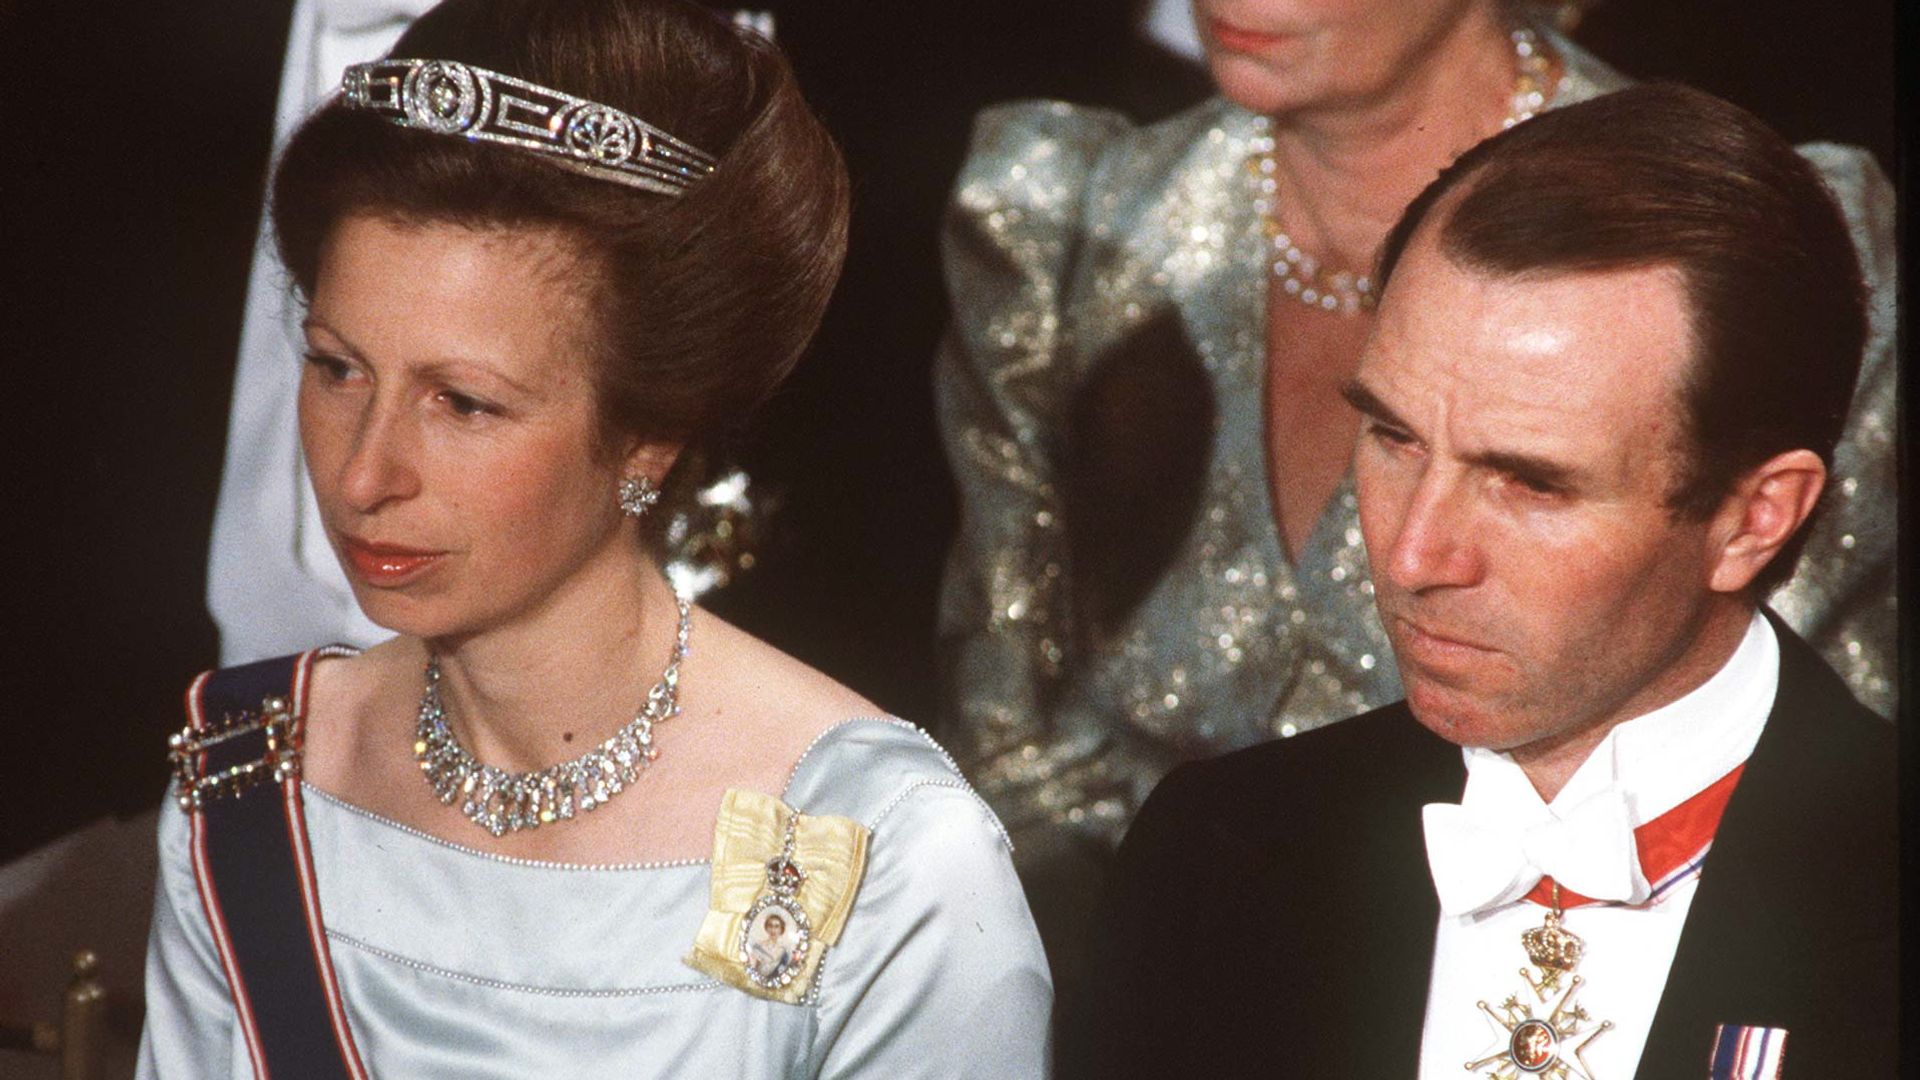 Princess Anne in a blue satin dress and tiara sitting next to her first husband Mark Phillips